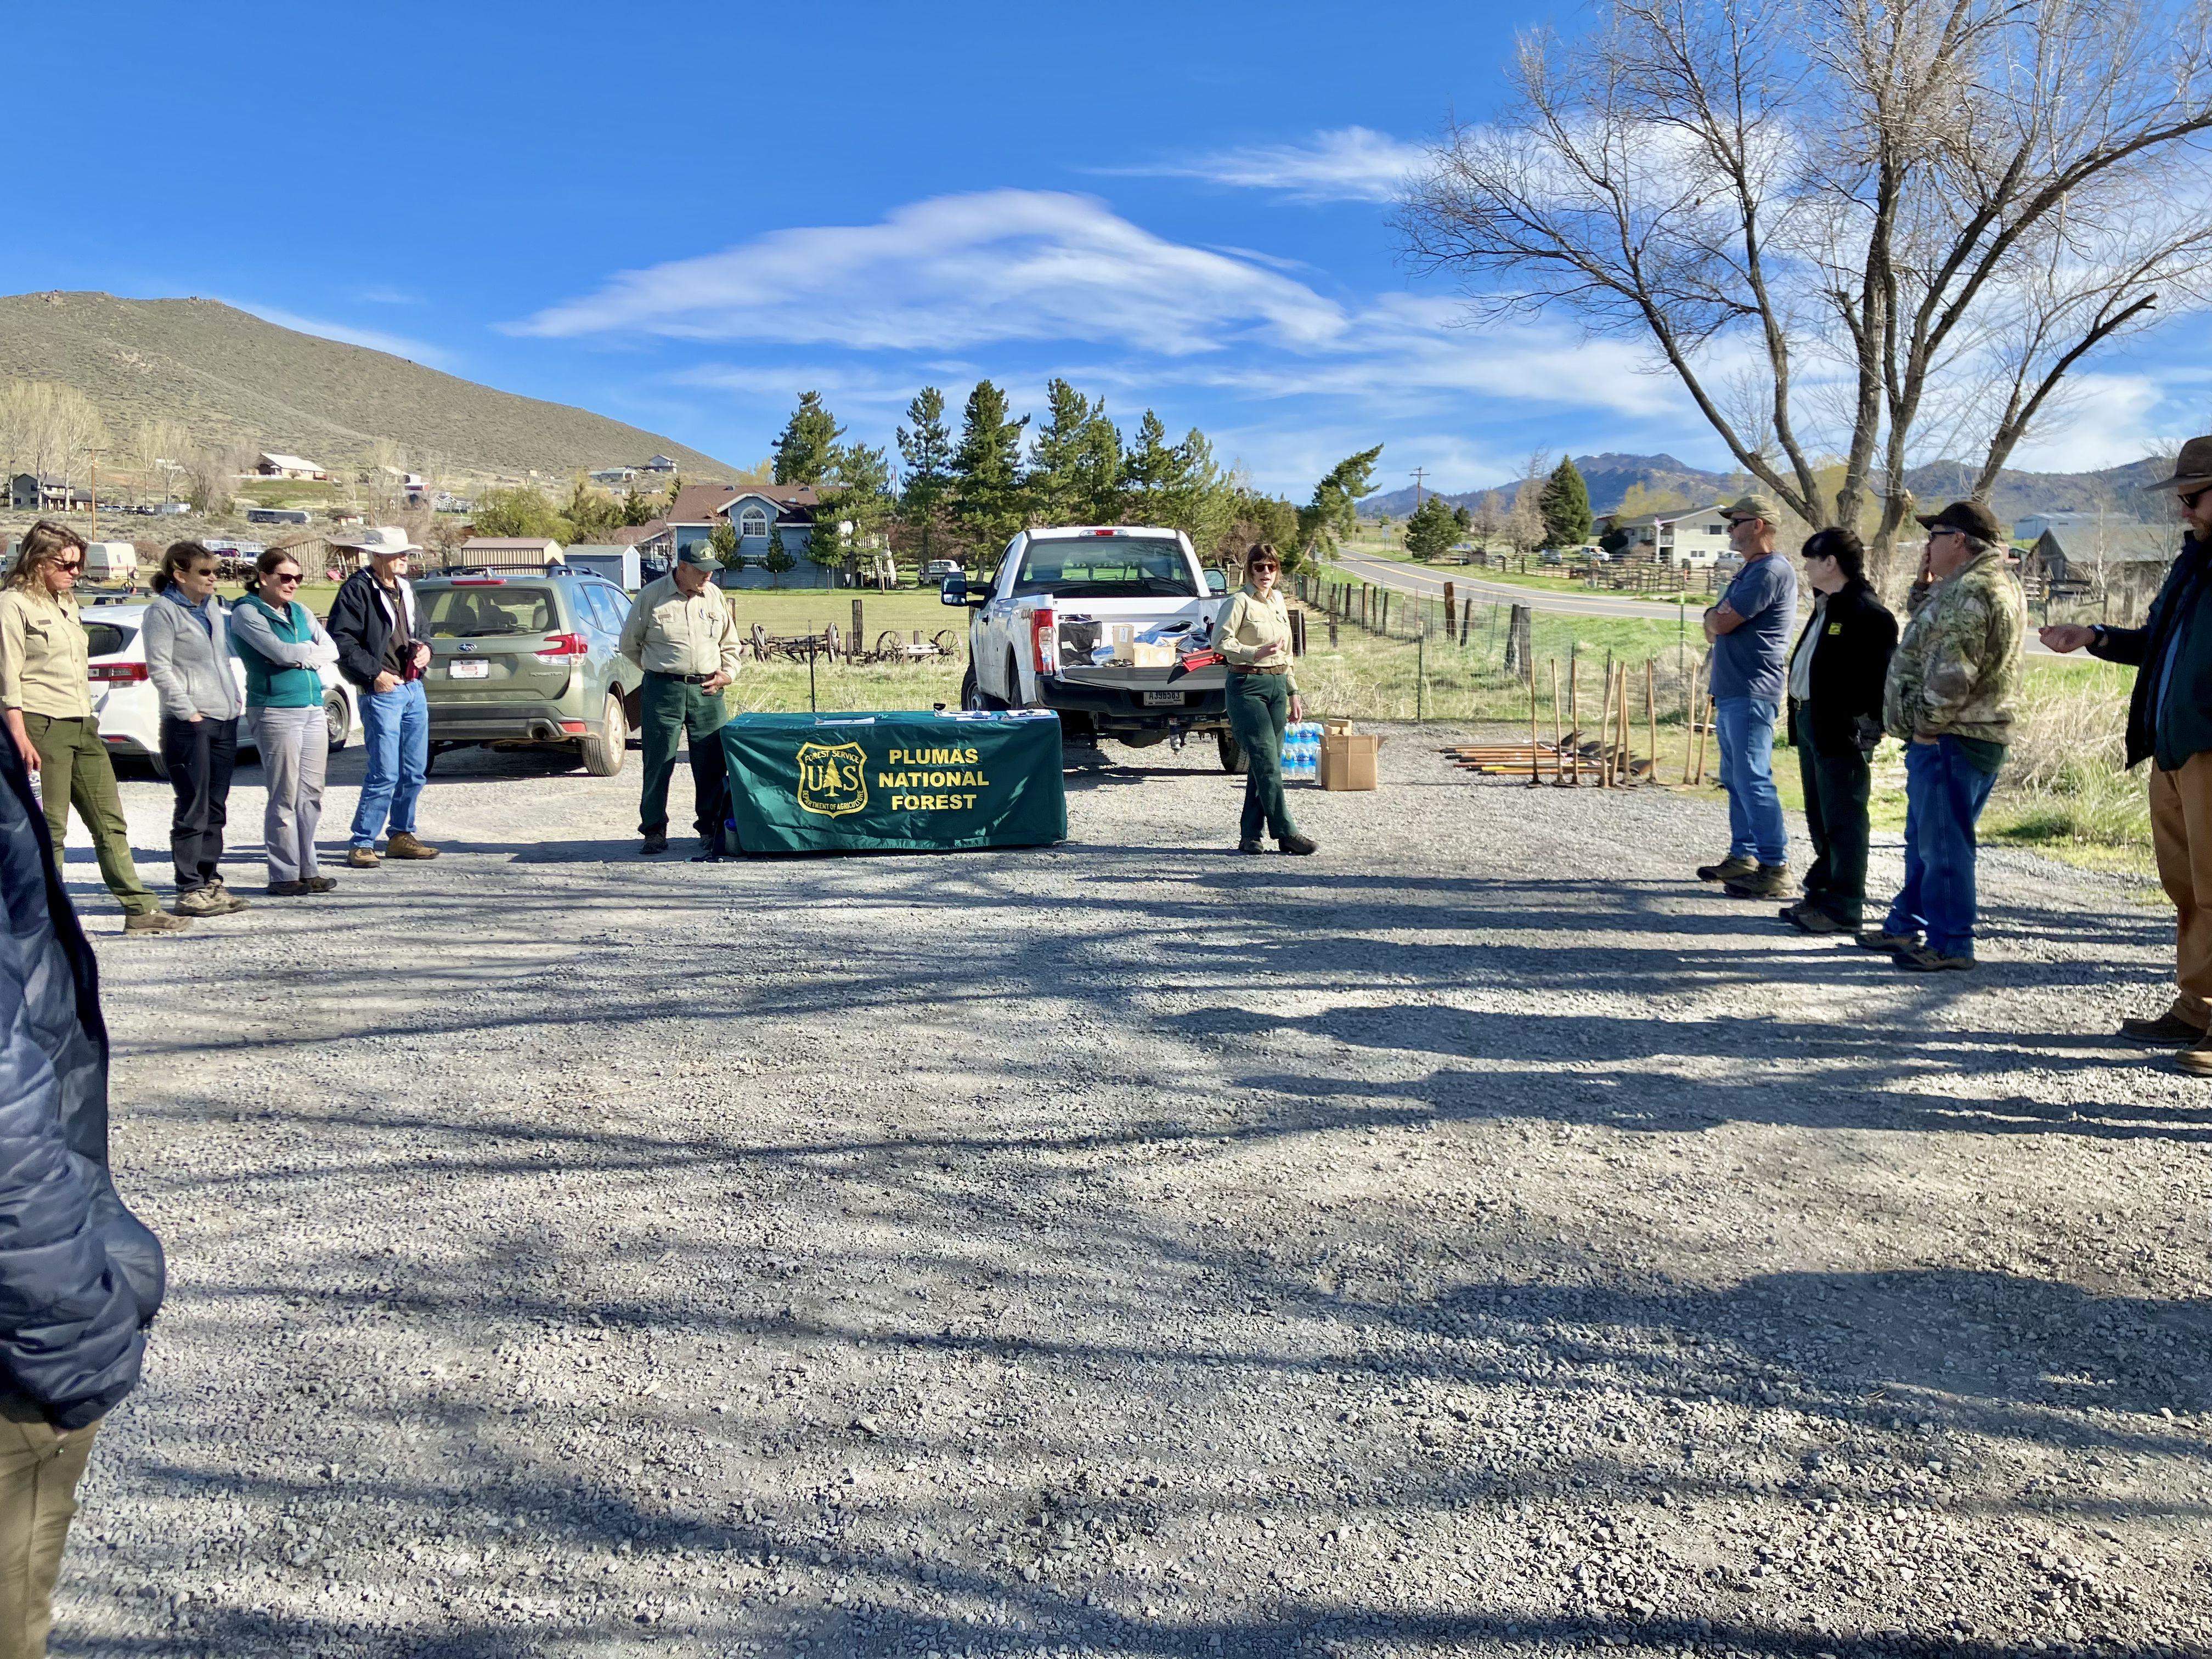 students worked with plumas national forest service